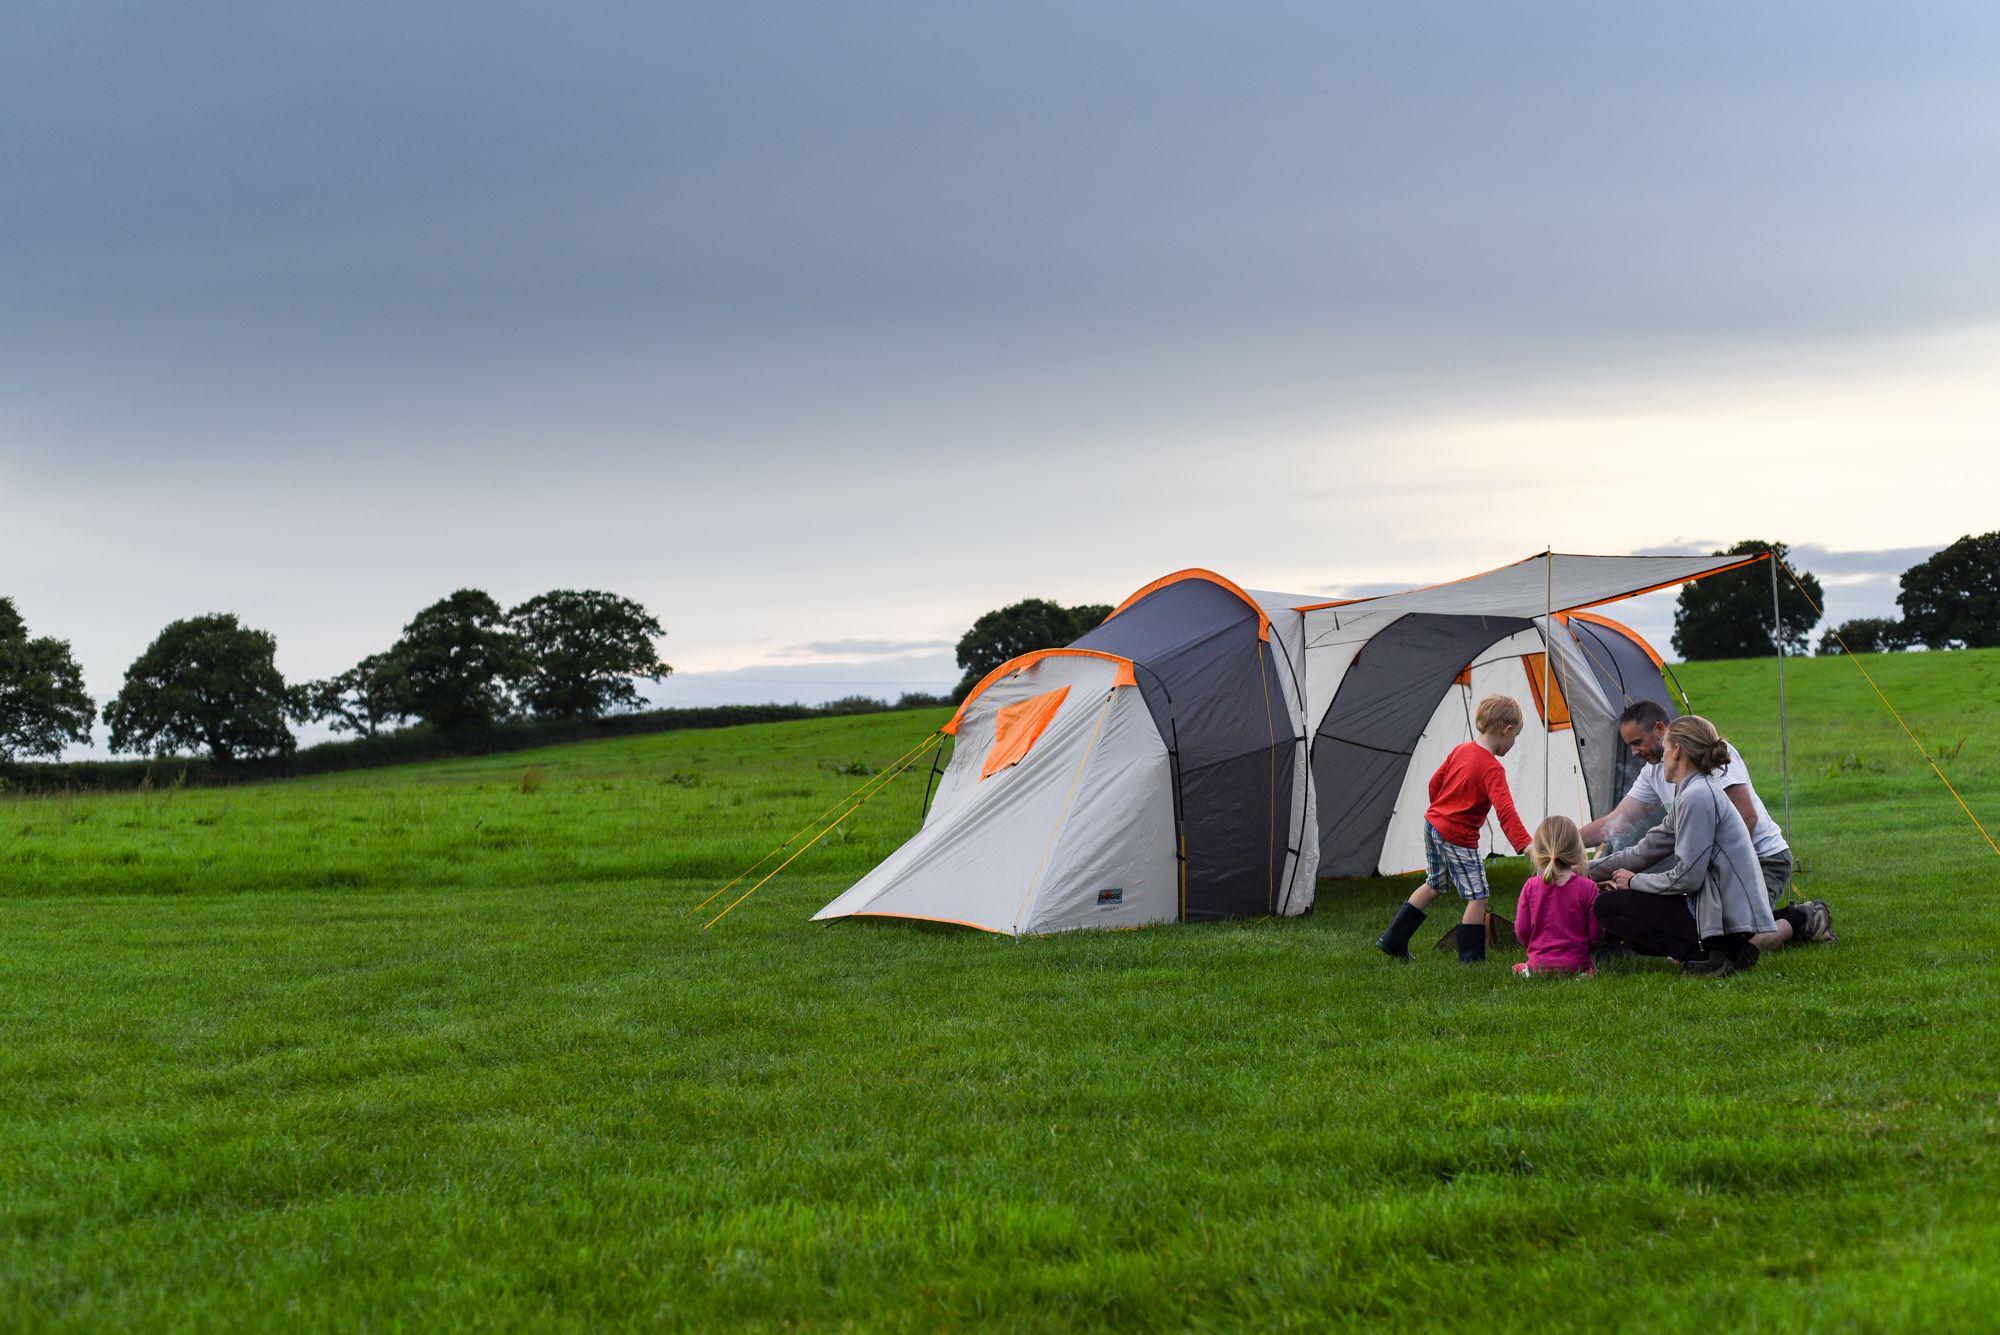 The rise of 'staycation' camping: What to look for in a local campsite